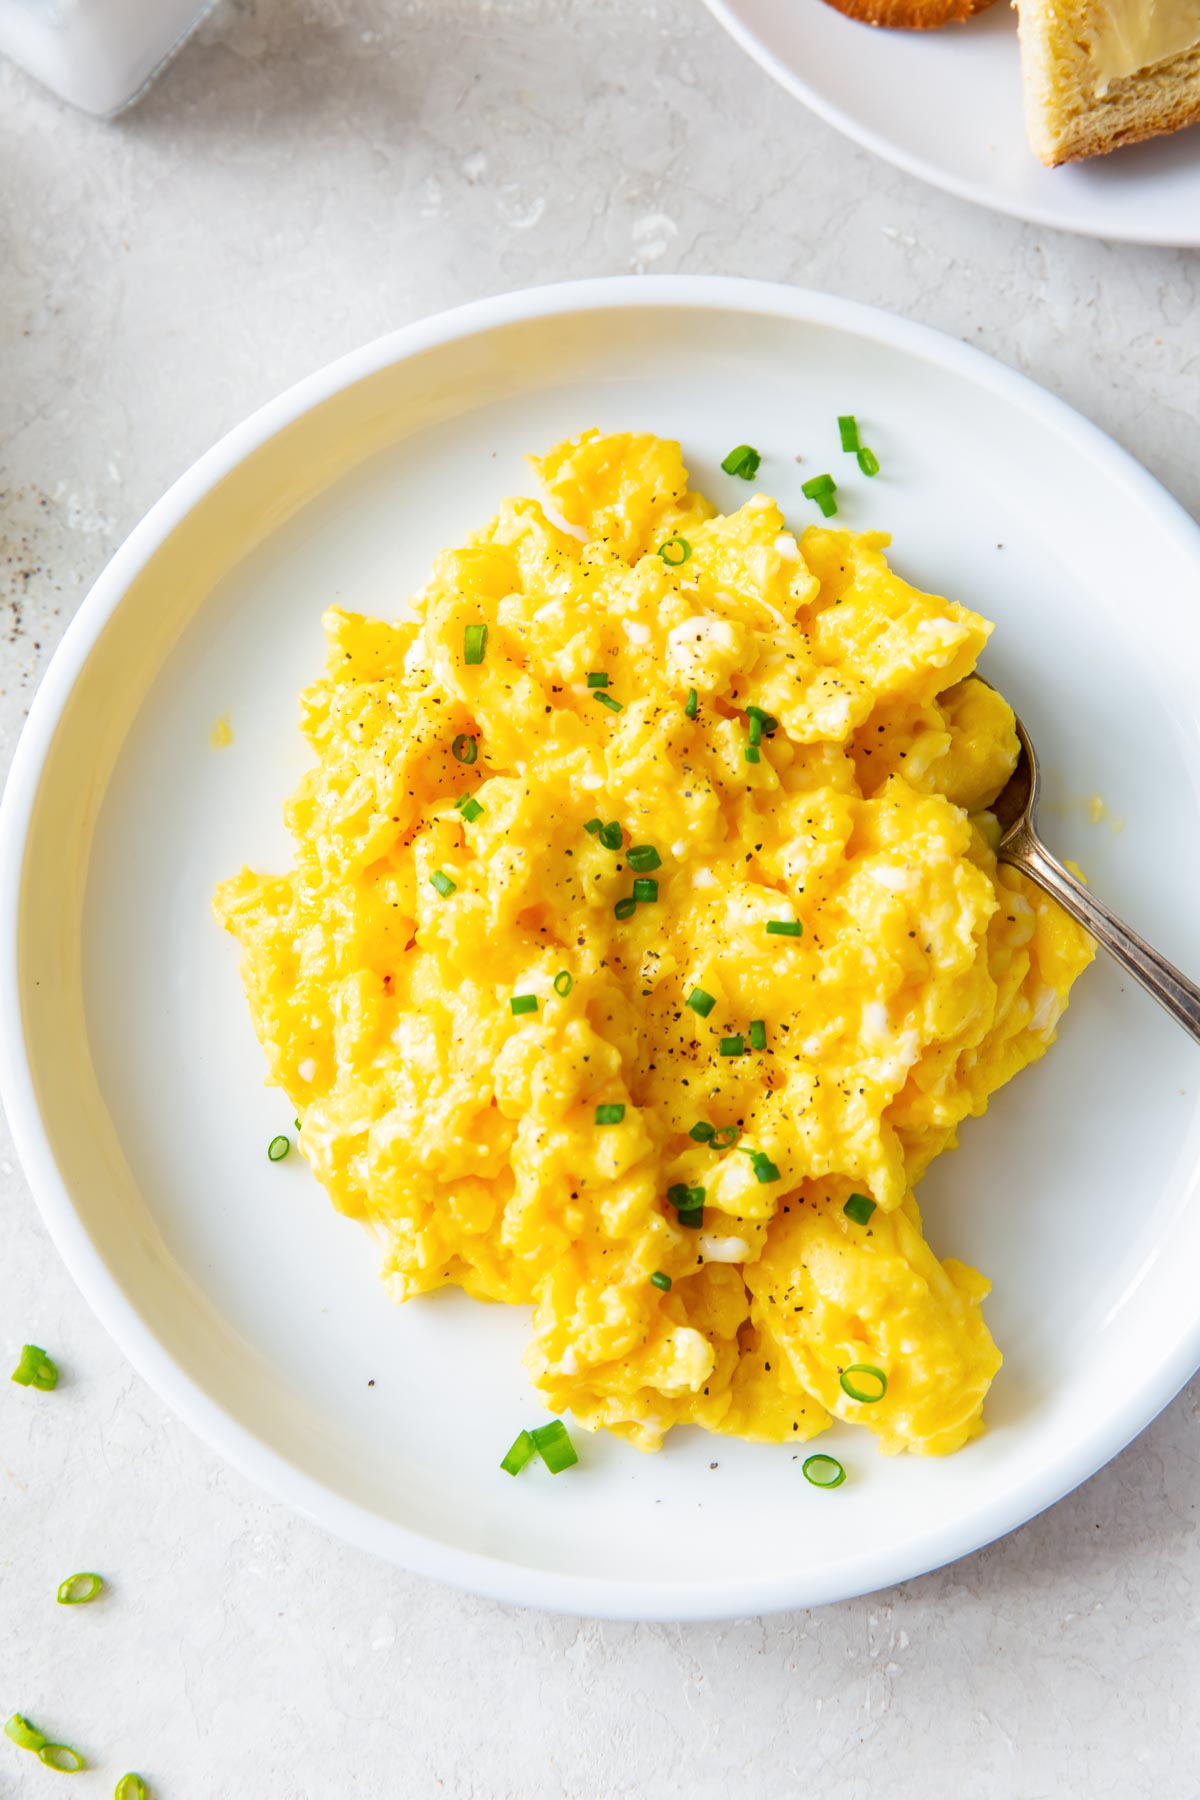 How to Make the Best Scrambled Eggs {So Easy!} - Kristine's Kitchen